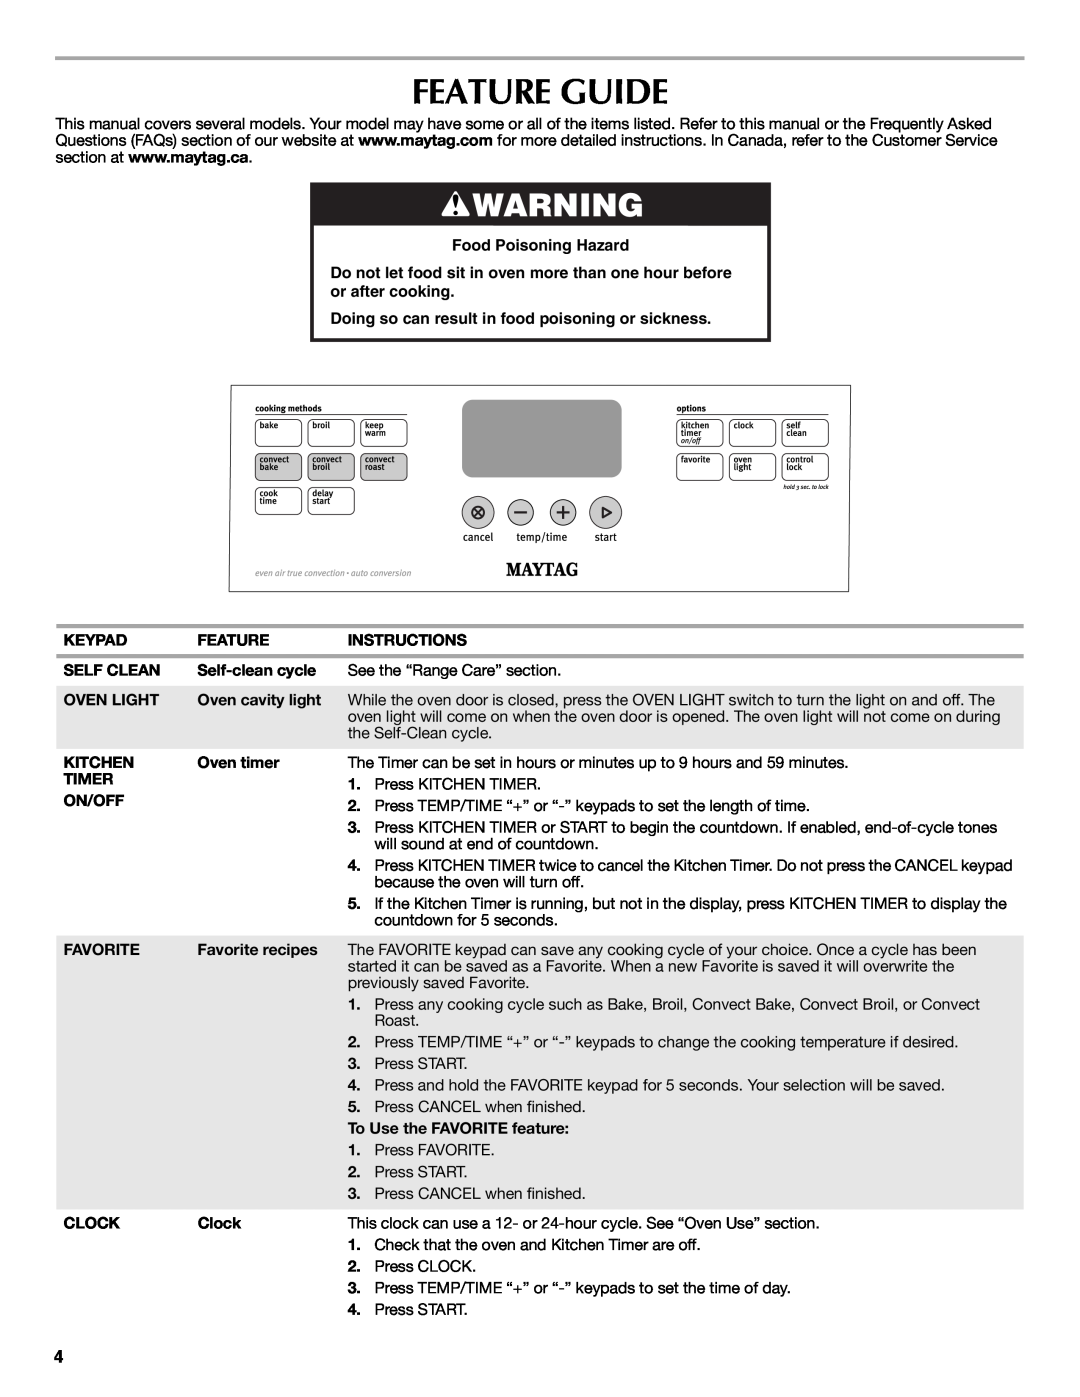 Maytag W10239464A warranty Feature Guide, Food Poisoning Hazard, Doing so can result in food poisoning or sickness 